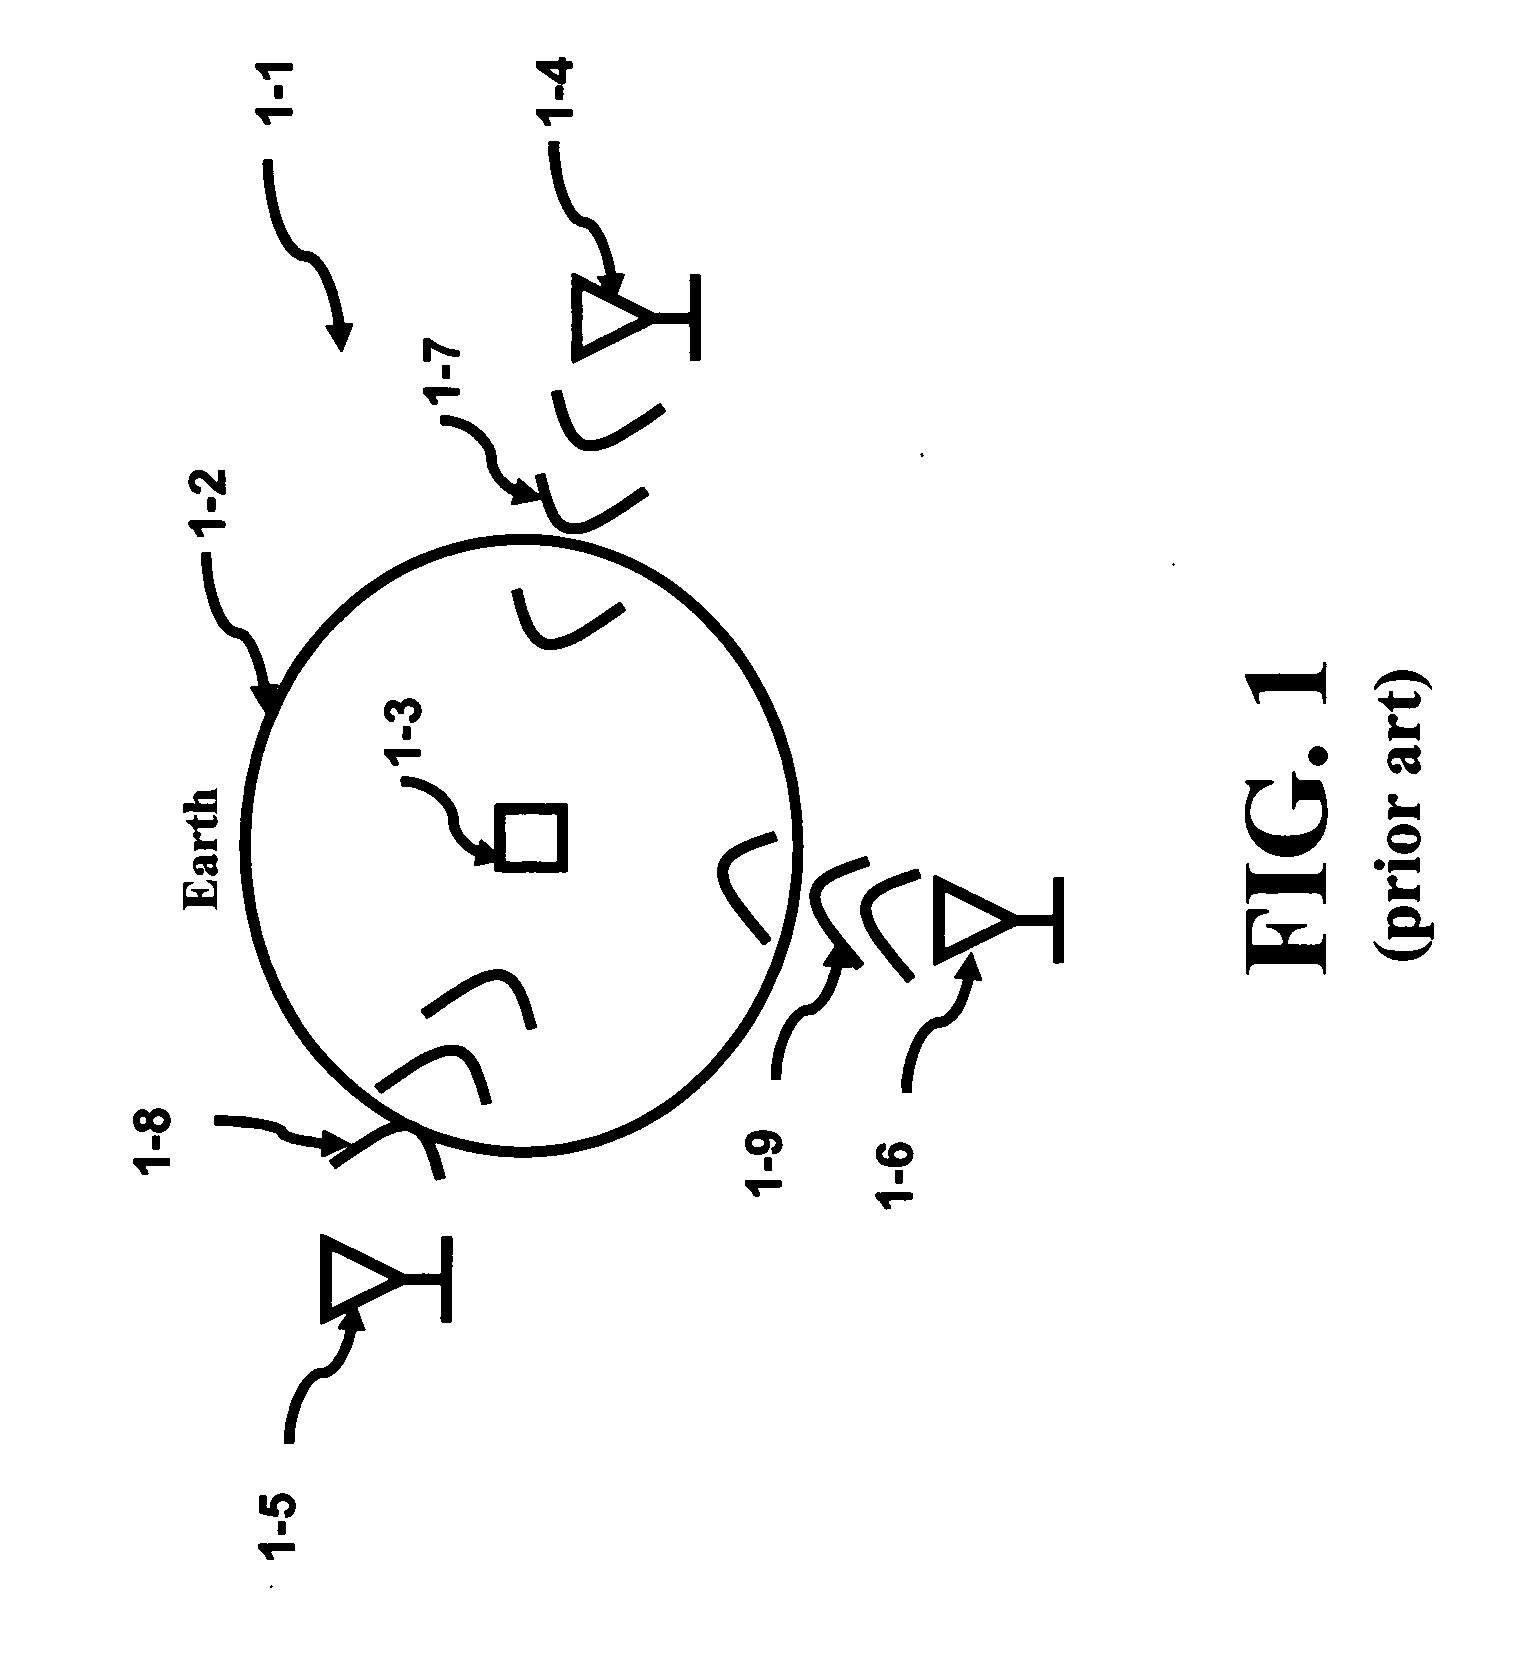 Apparatus and method for indentifying the geographic location and time in a recorded sound track by using a stealth mode technique